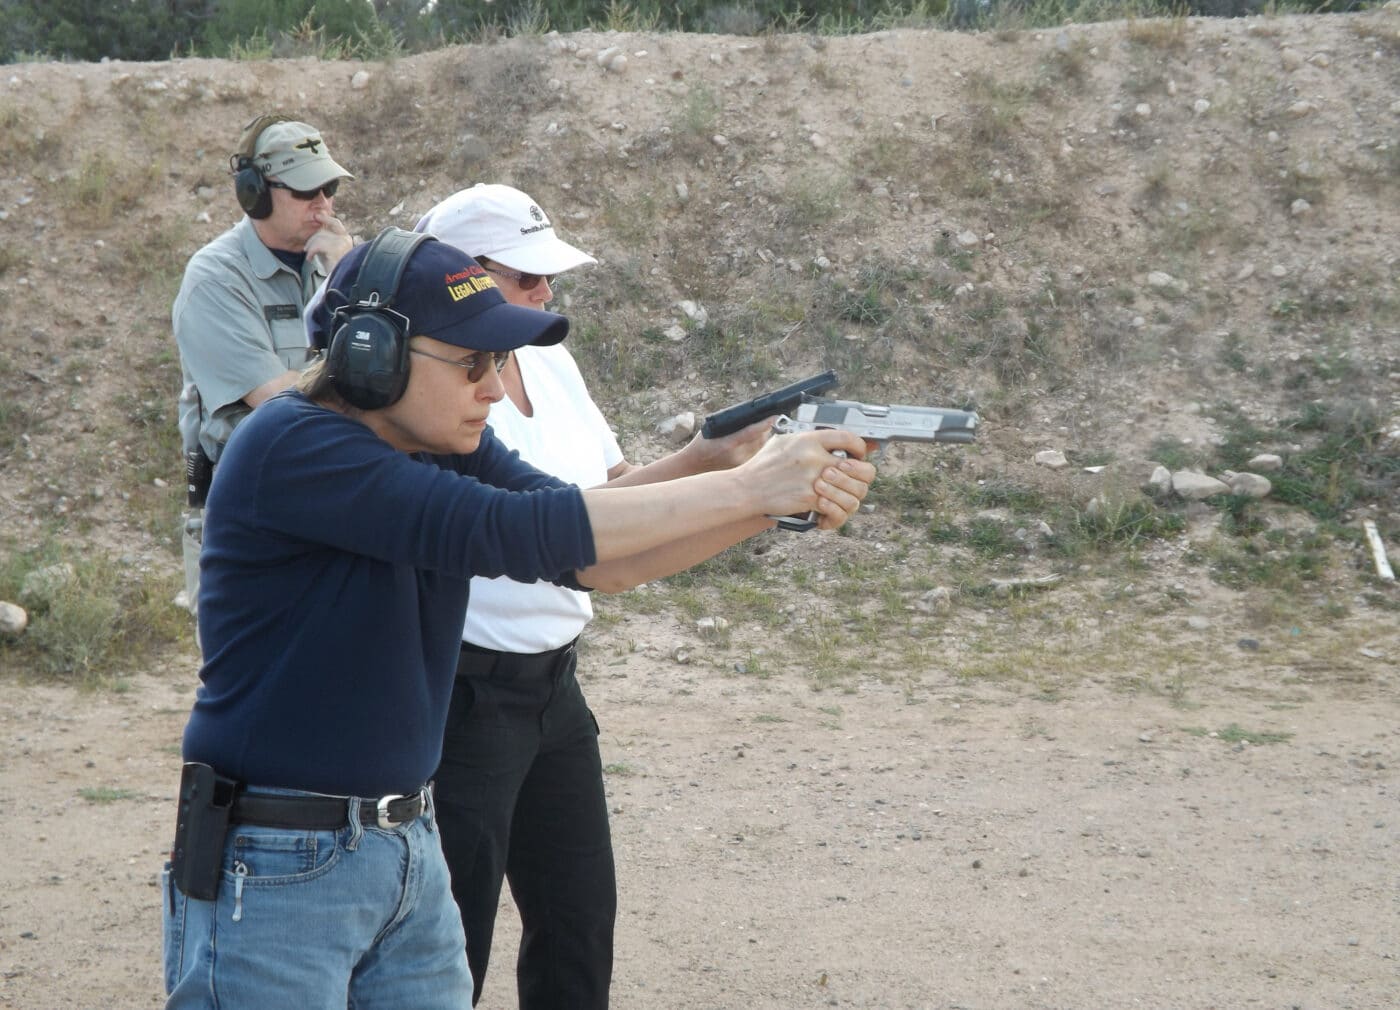 Gila Hayes with a 9mm Springfield 1911